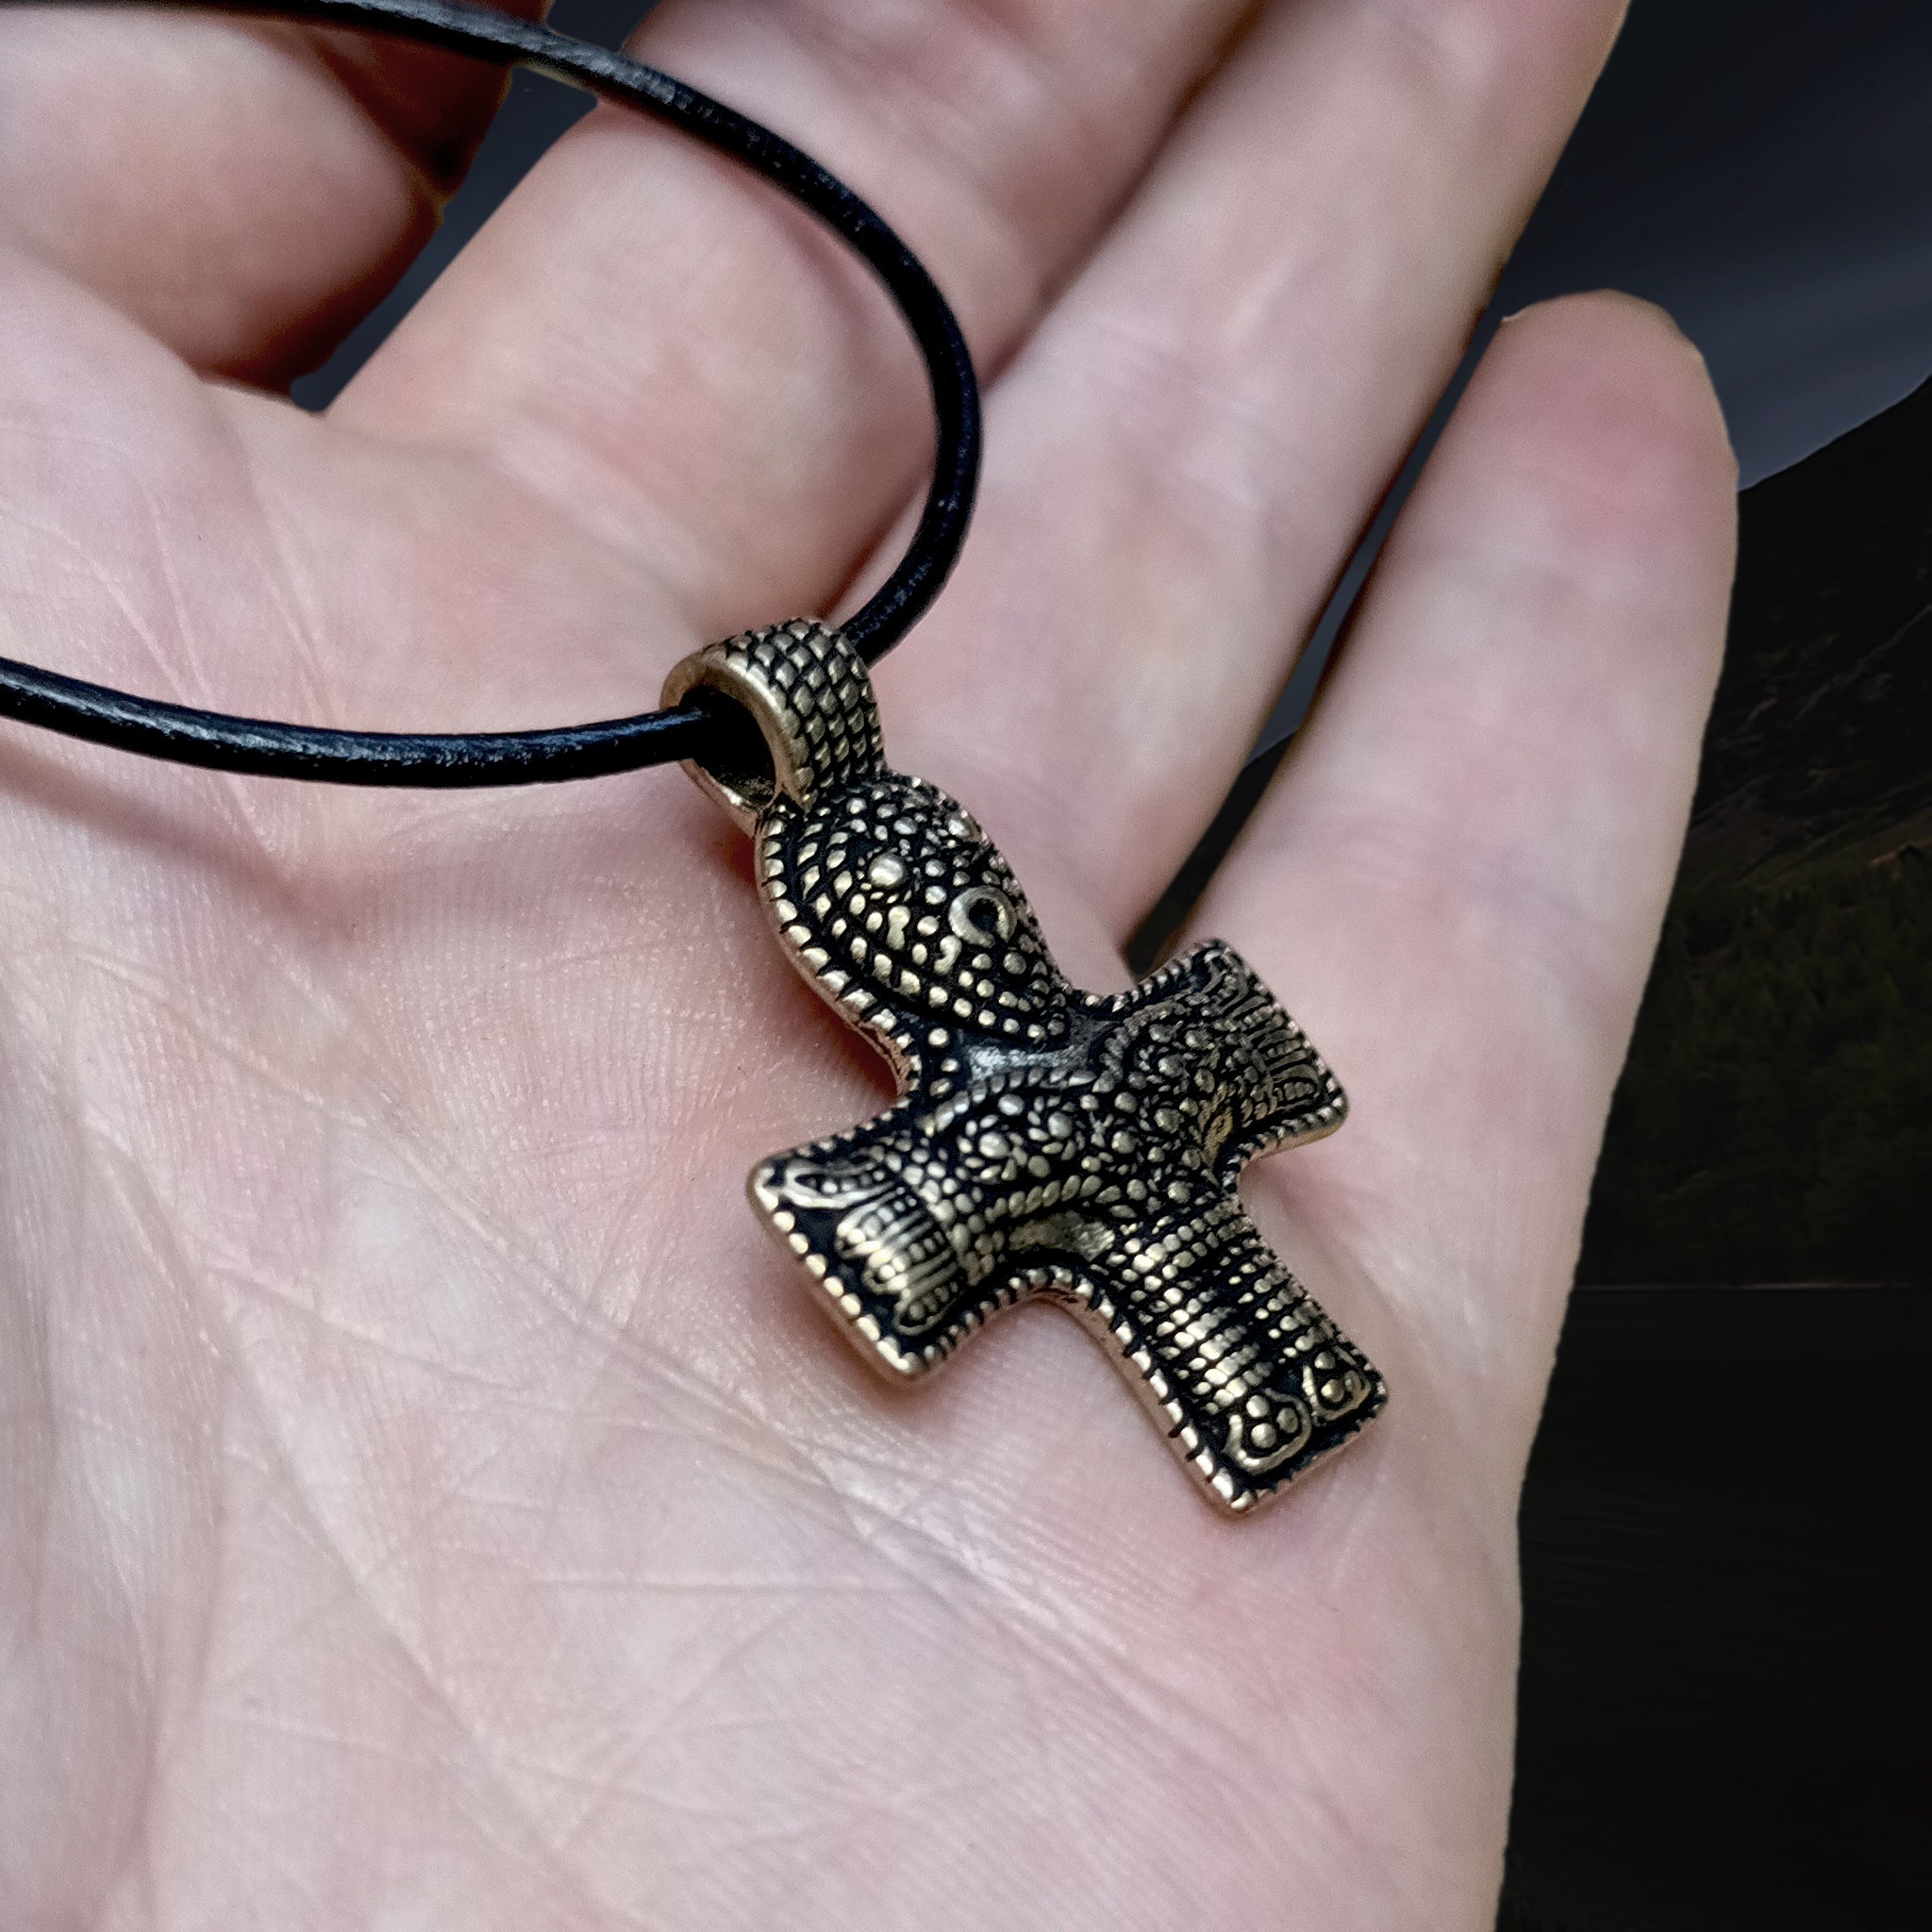 Bronze Crucifix Pendant from Denmark on Leather Thong, On Hand - Angle View - Viking Jewelry